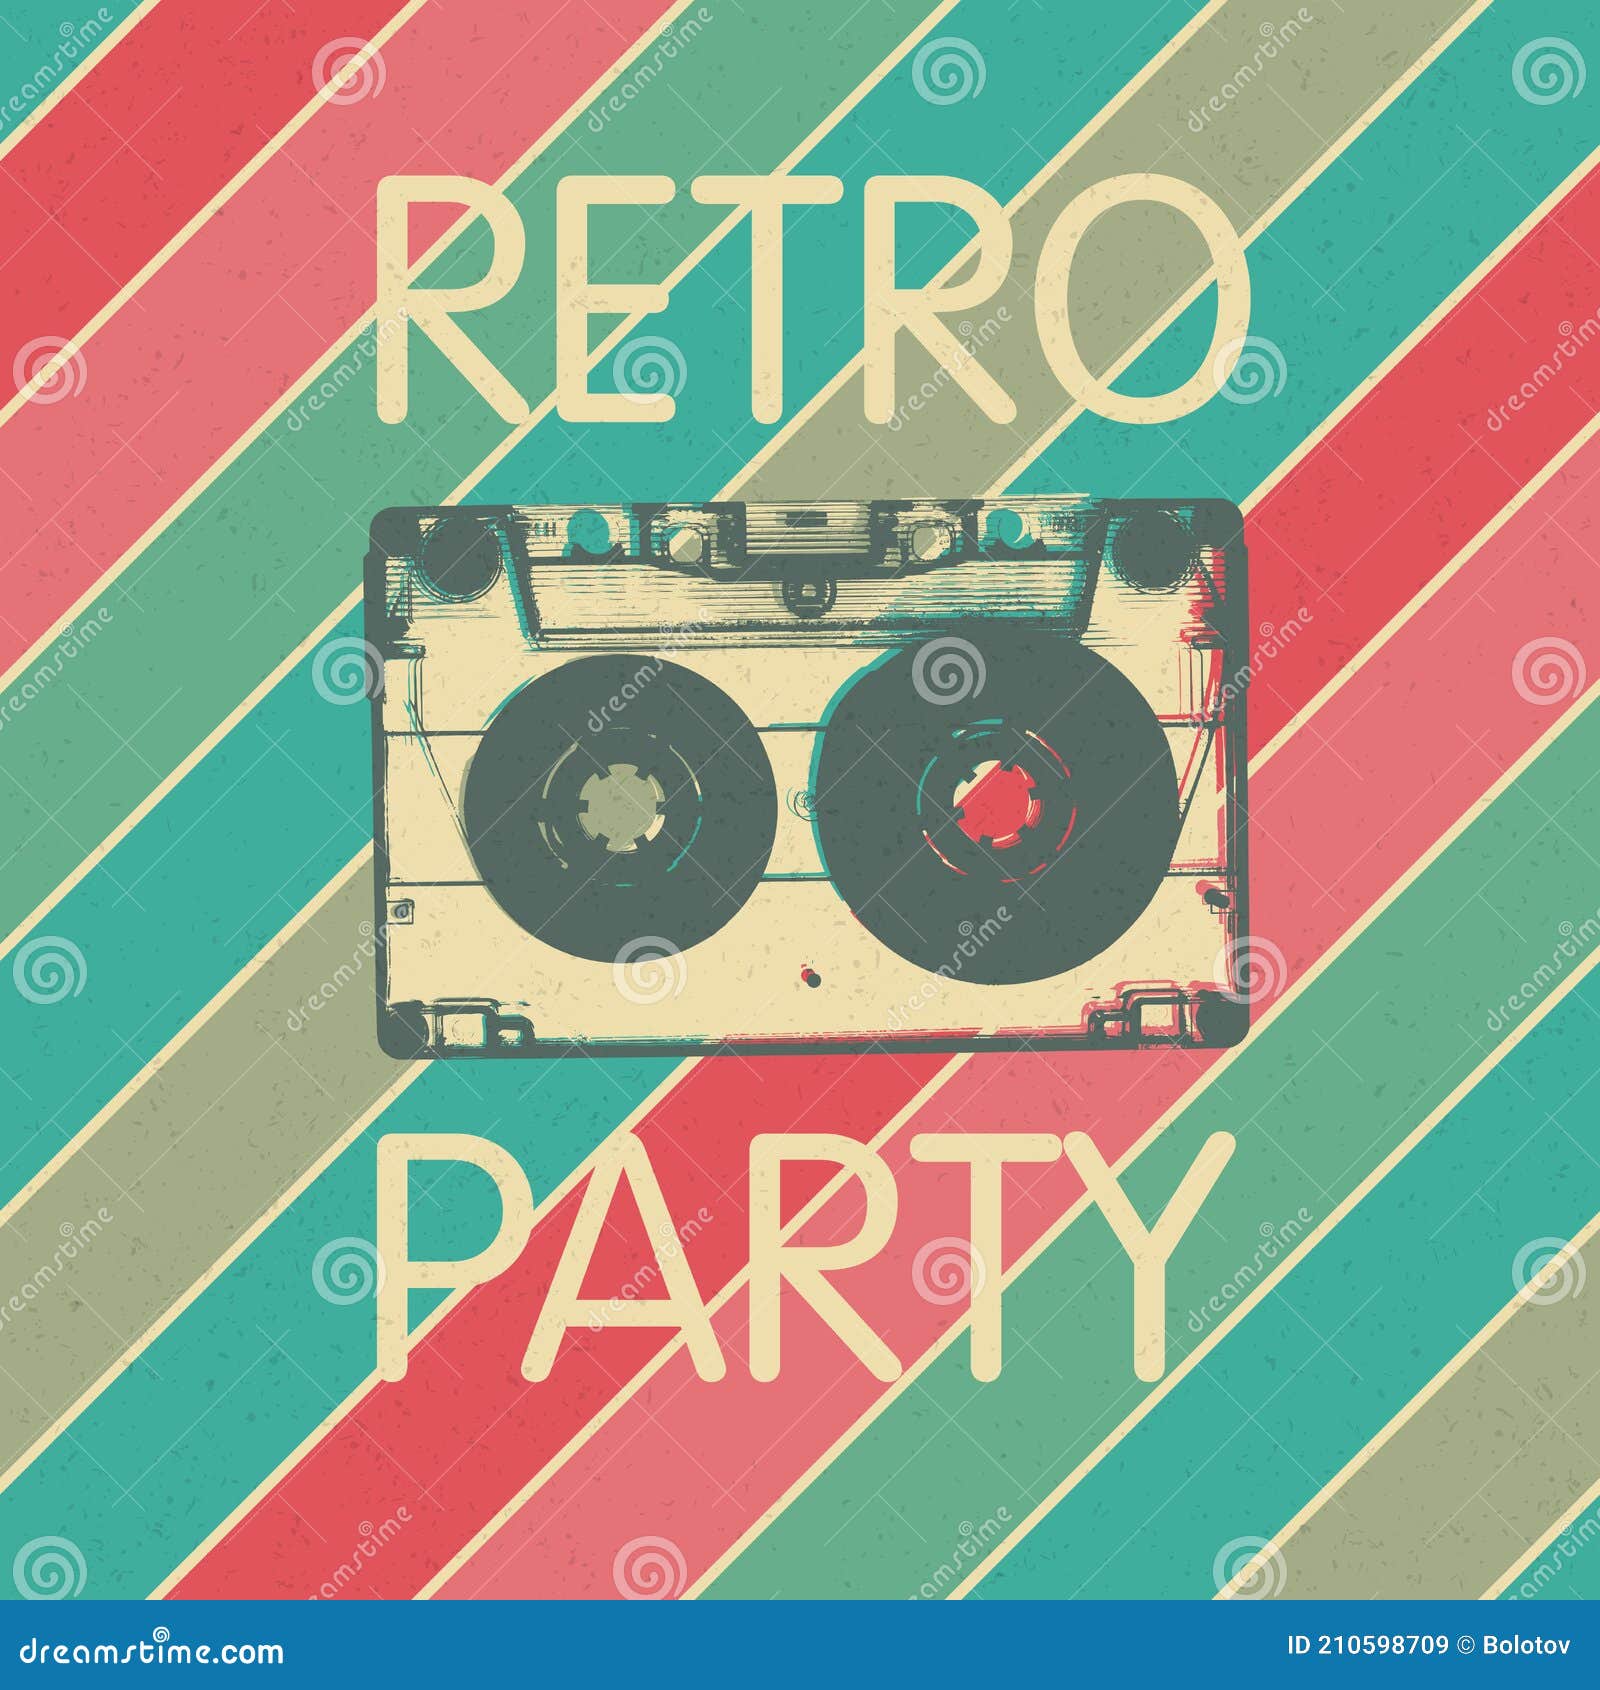 Retro Music Party Poster Design. Disco Music Vintage Party Invitation  Template Stock Vector - Illustration of disco, music: 210598709